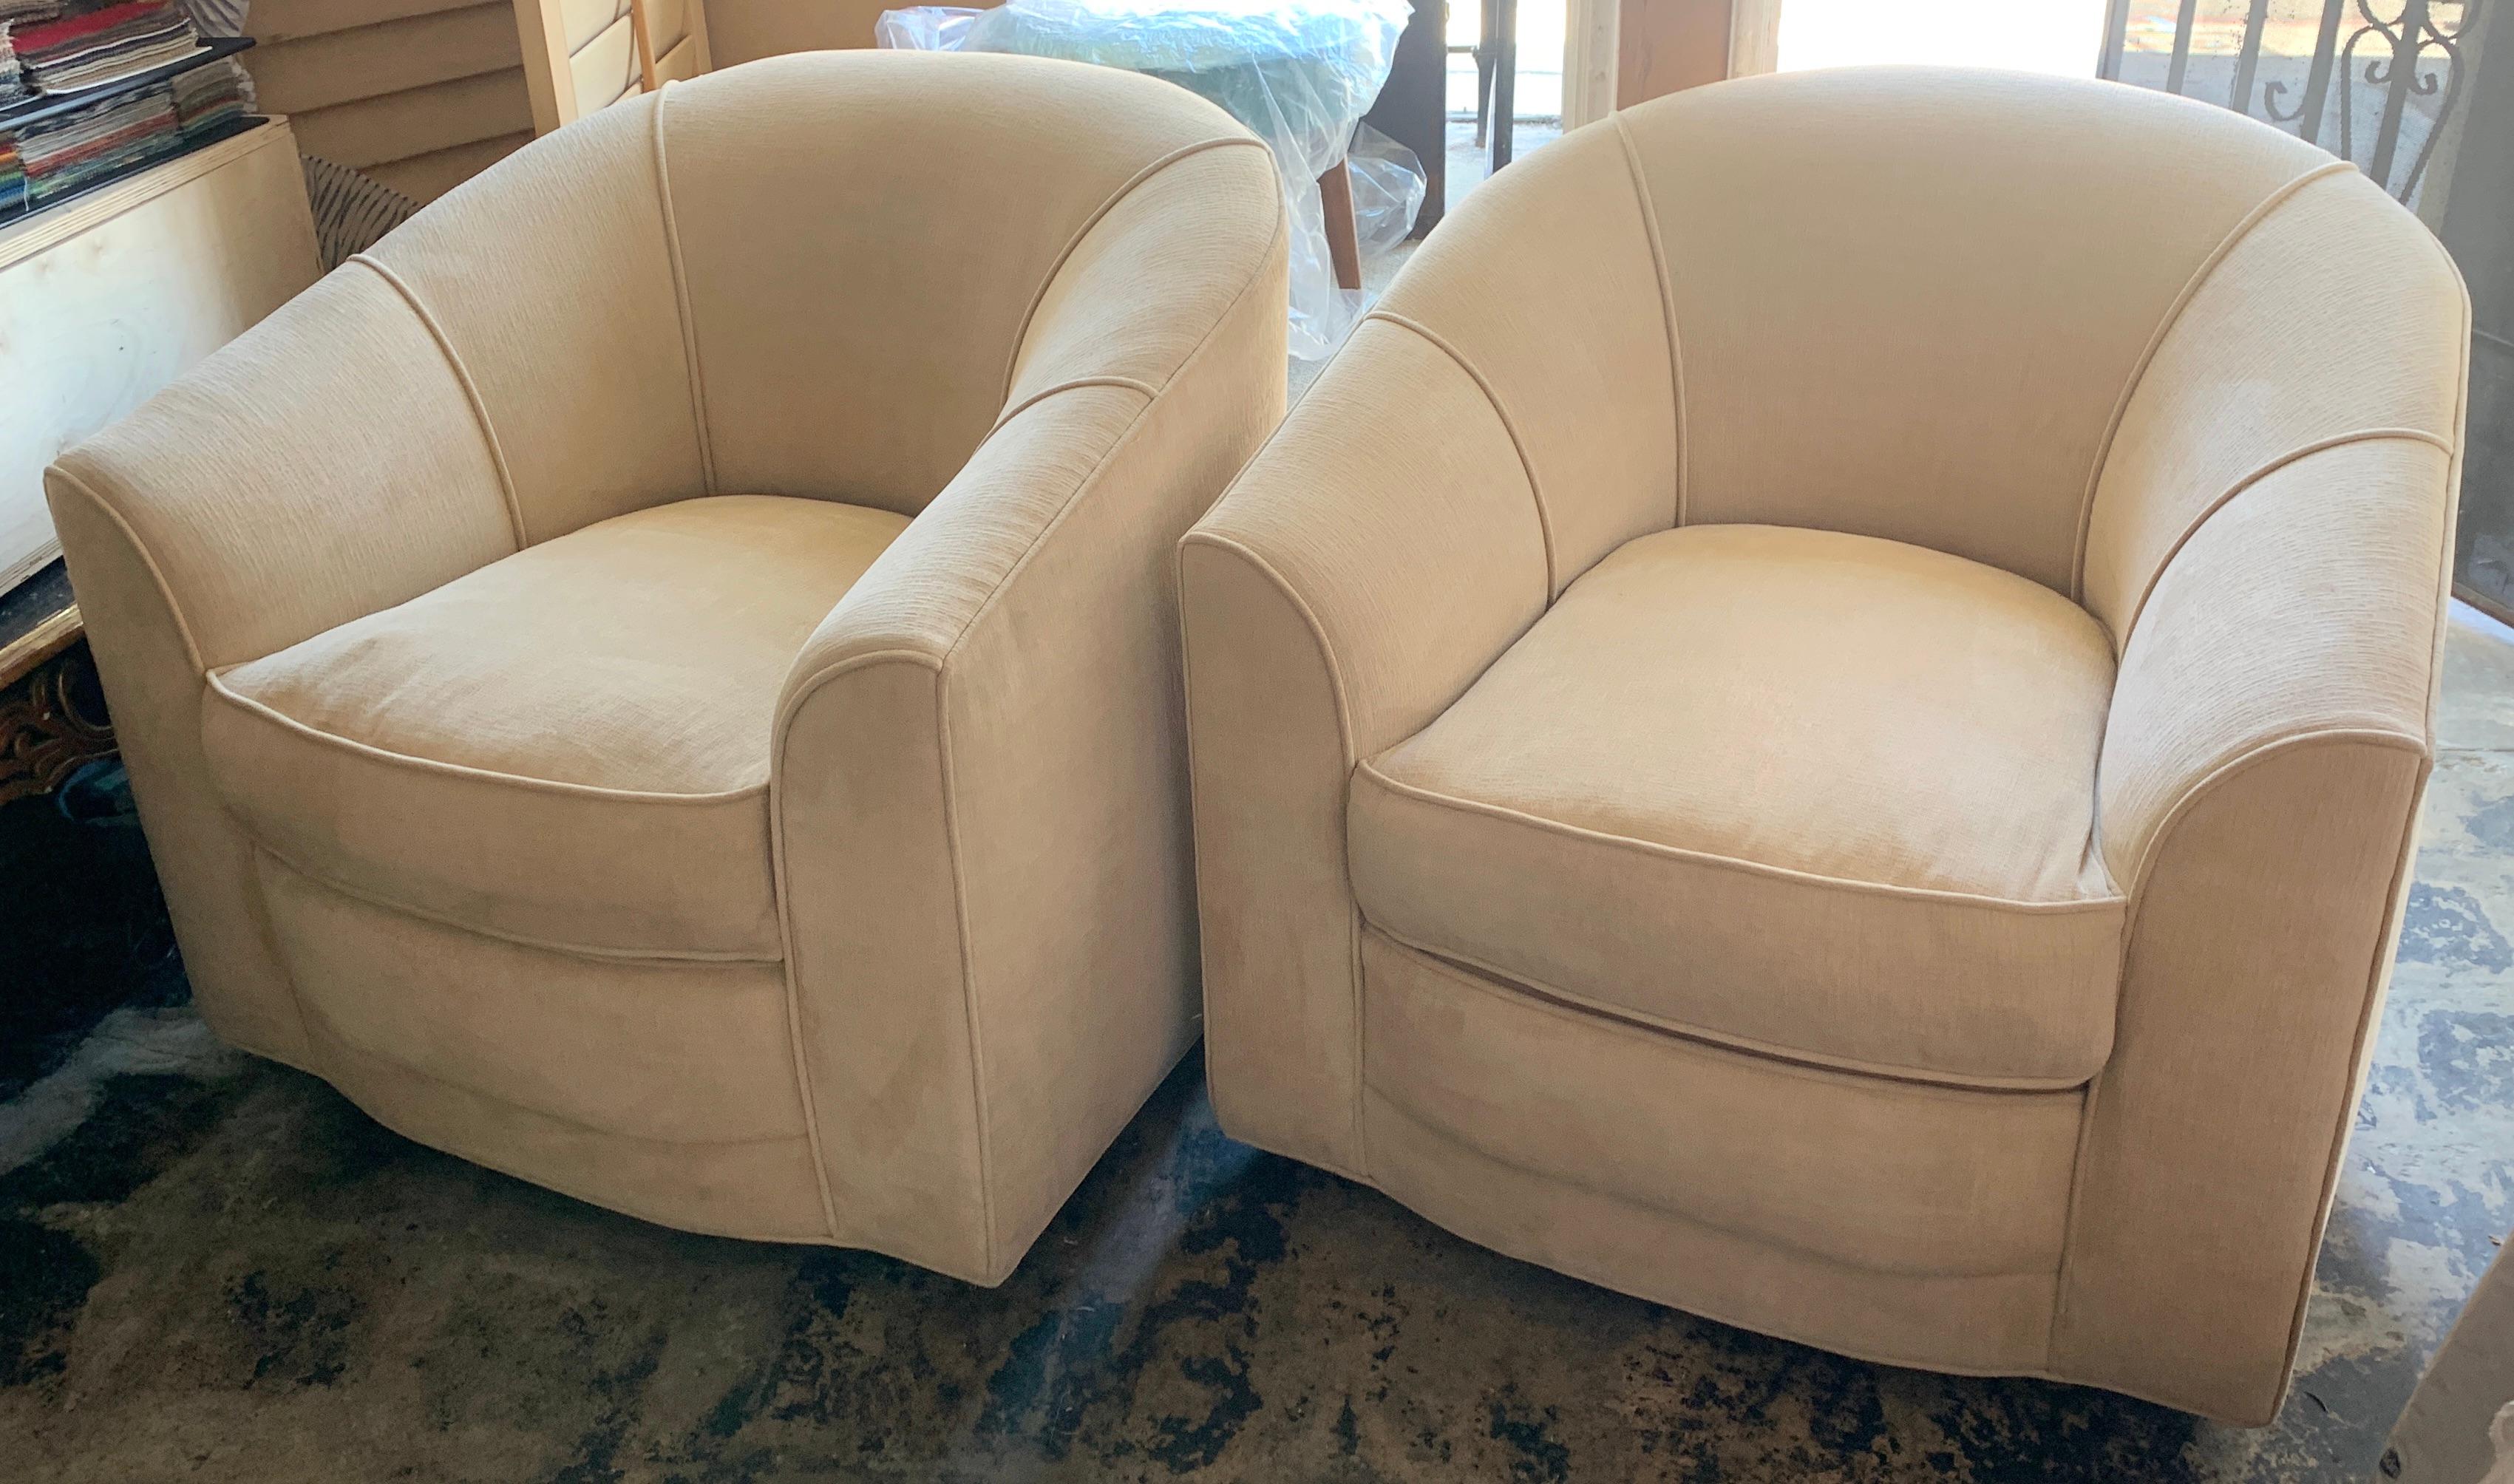 Pair of mid century swivel club chairs in the style of Milo Baughman - Cream upholstery looks to be original and in very good condition. Large and comfortable the swivel makes them well suited for any room, especially a den or bedroom.